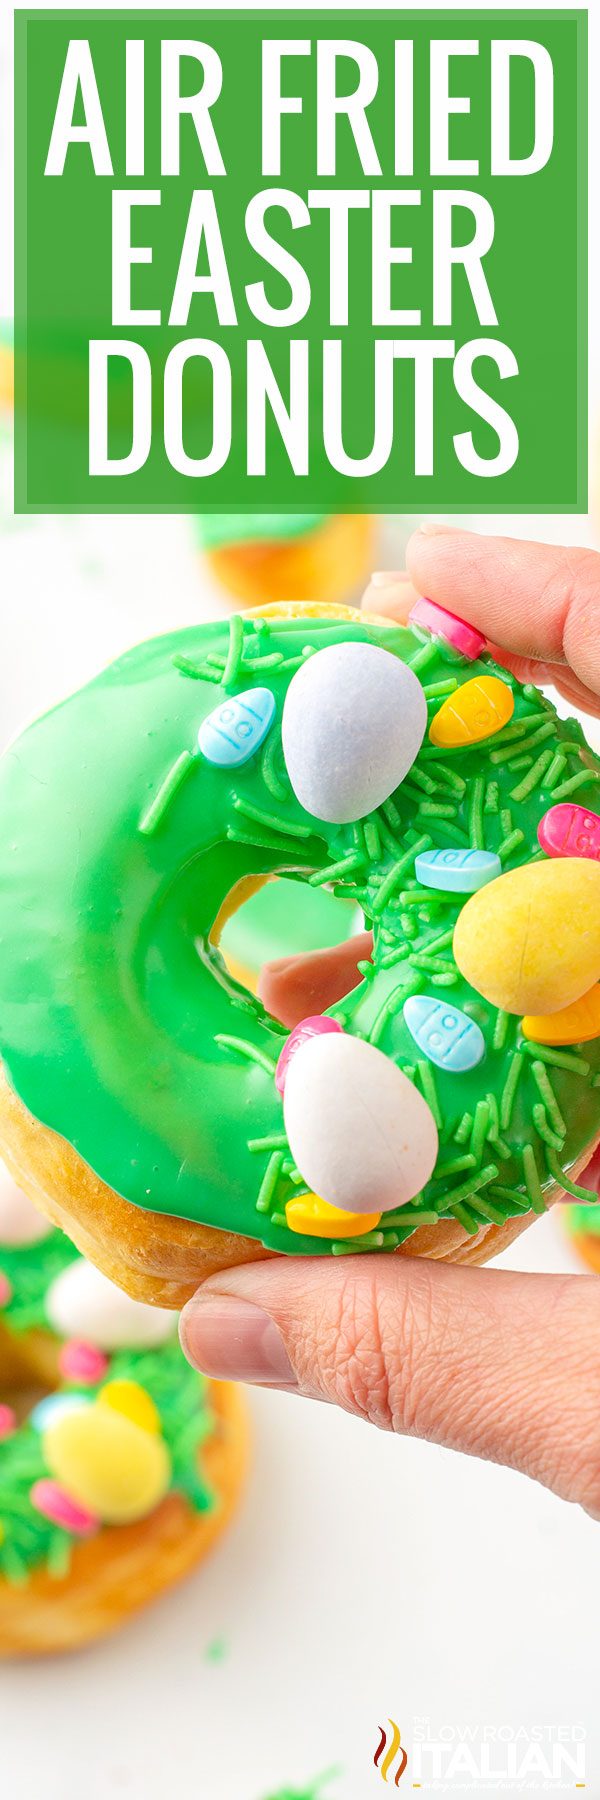 holding easter decorated air fryer biscuit donuts